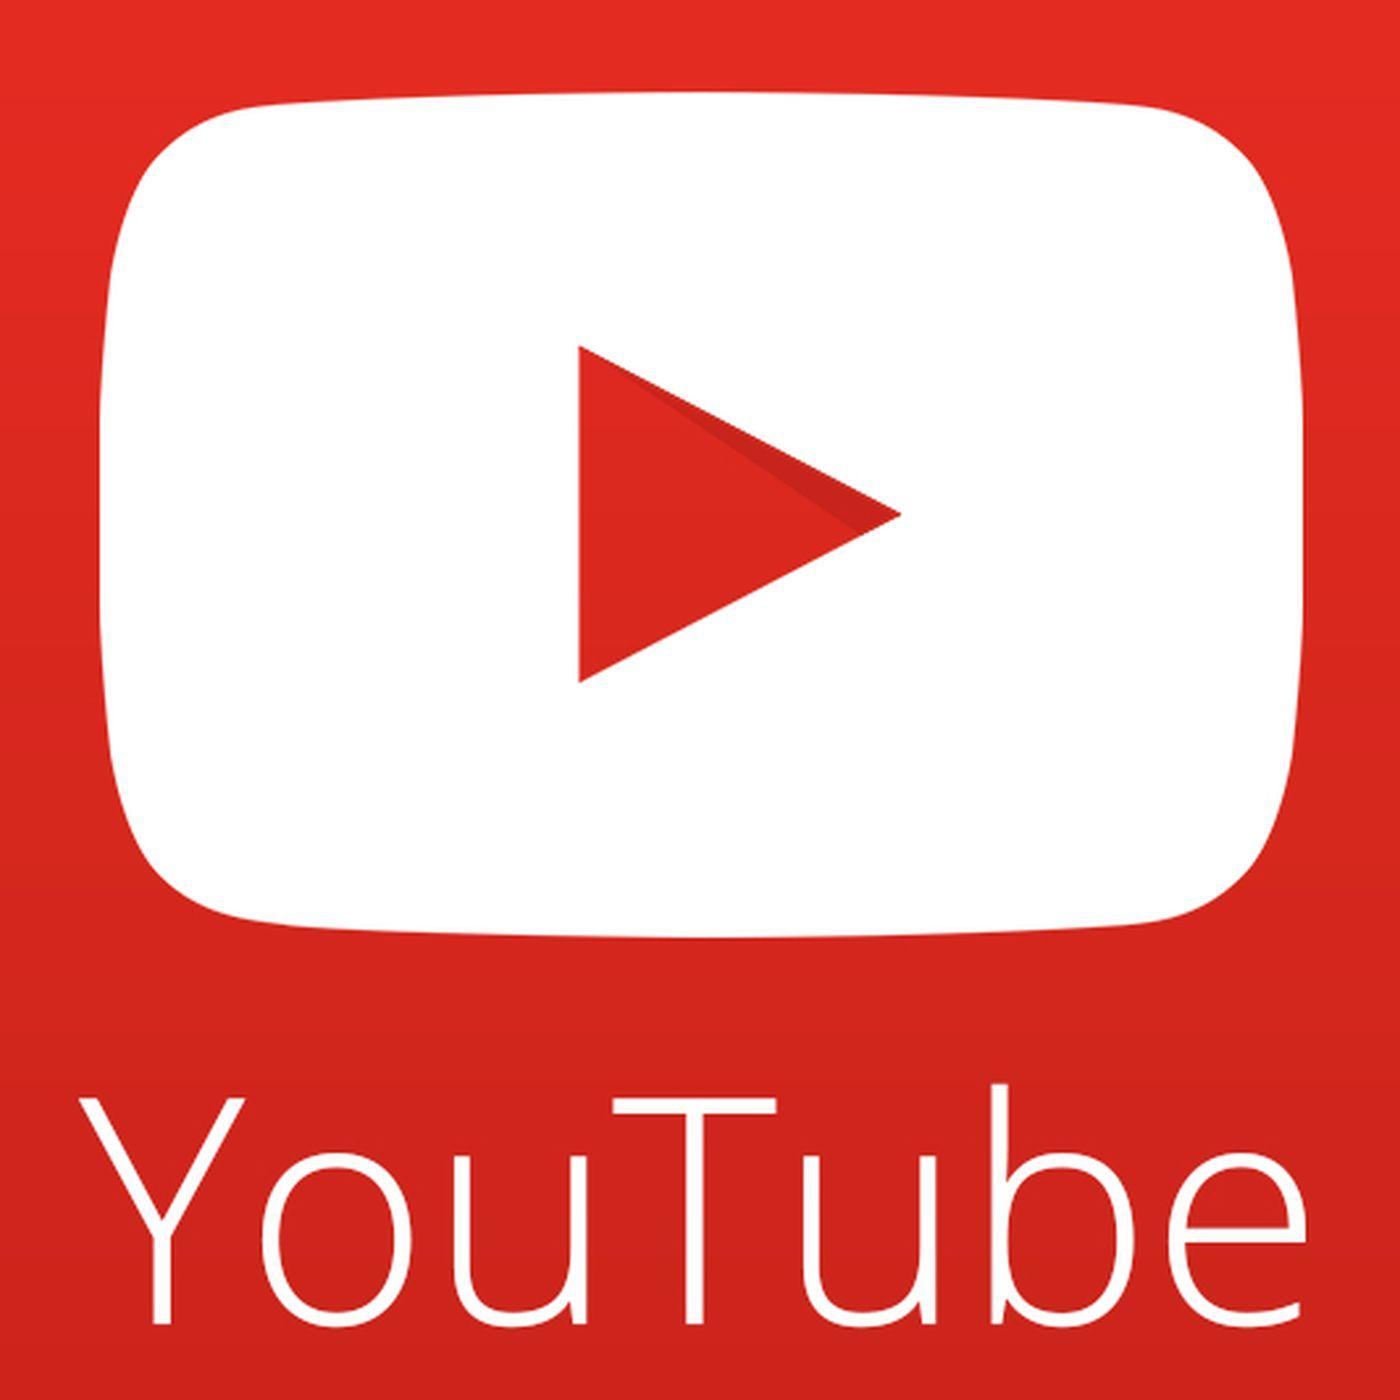 Yoututbe Logo - YouTube teases new logo on Facebook and Twitter